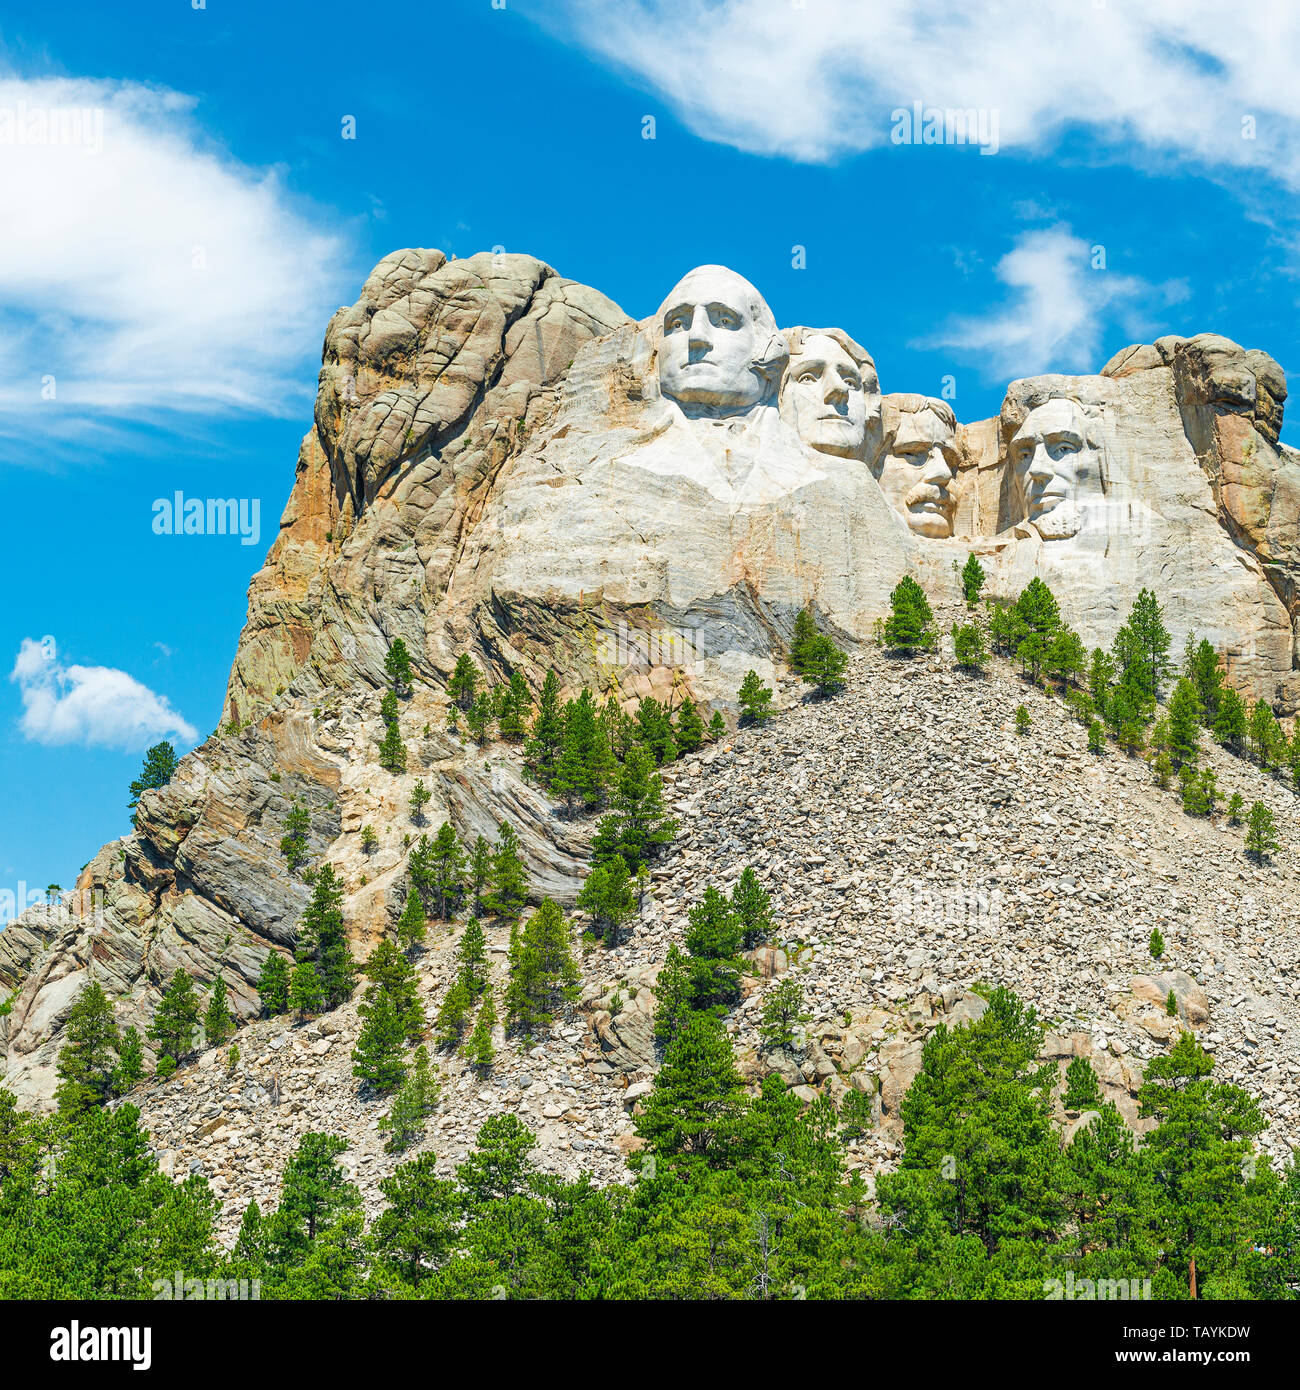 Mount Rushmore national monument with a pine tree forest in the Black Hills near Rapid City in South Dakota, United States of America, USA. Stock Photo